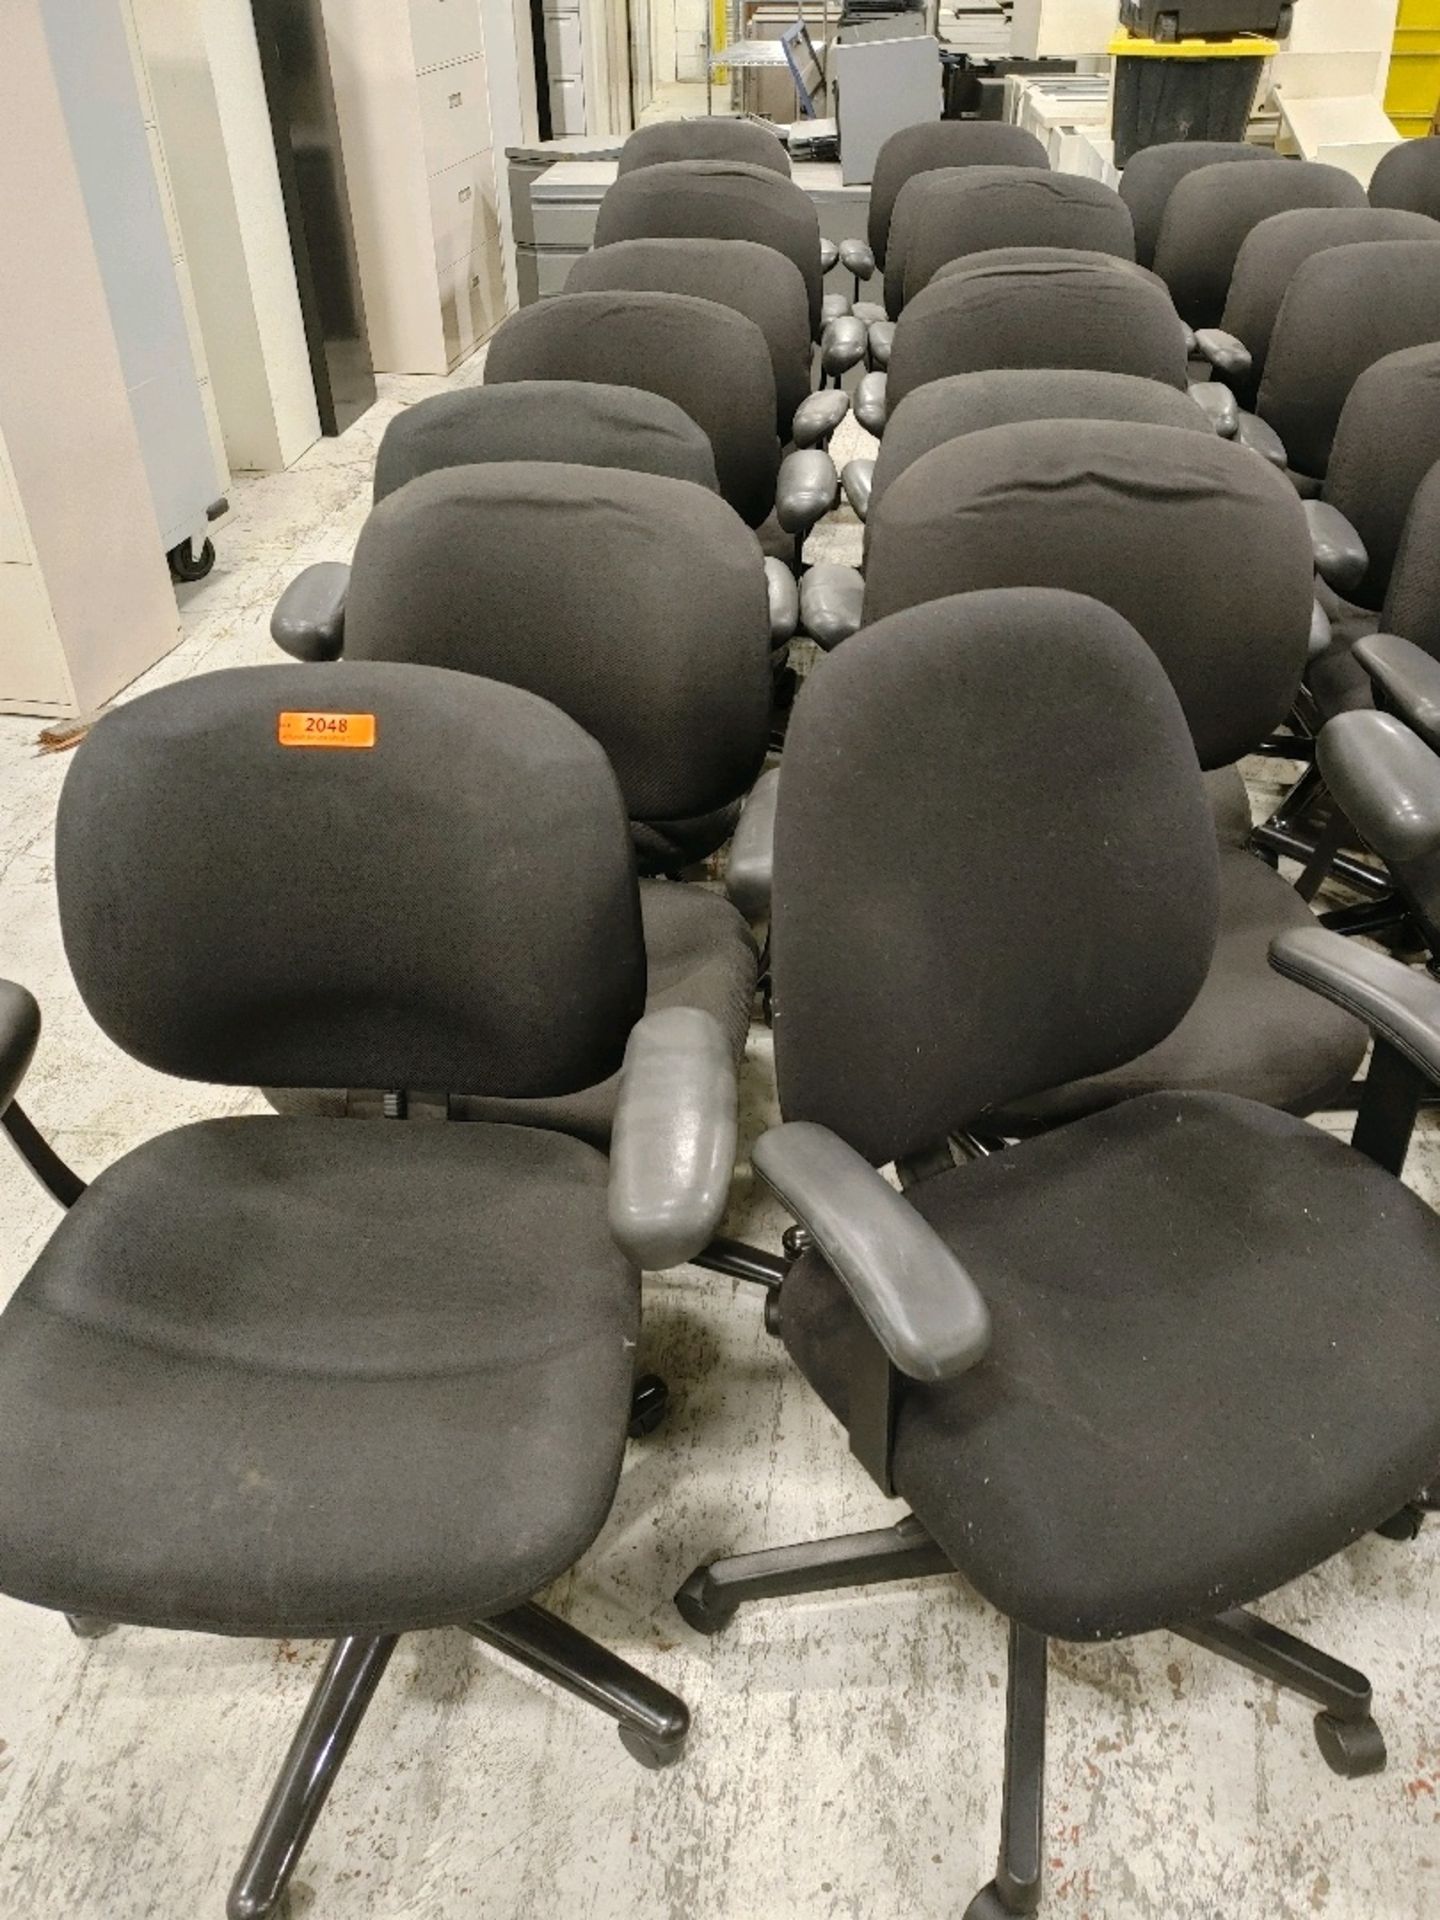 VARIOUS OFFICE ARM-CHAIRS ON WHEELS QTY: 15, LOCATED: 6101 N. 64TH STREET MILWAUKEE, WI 53218